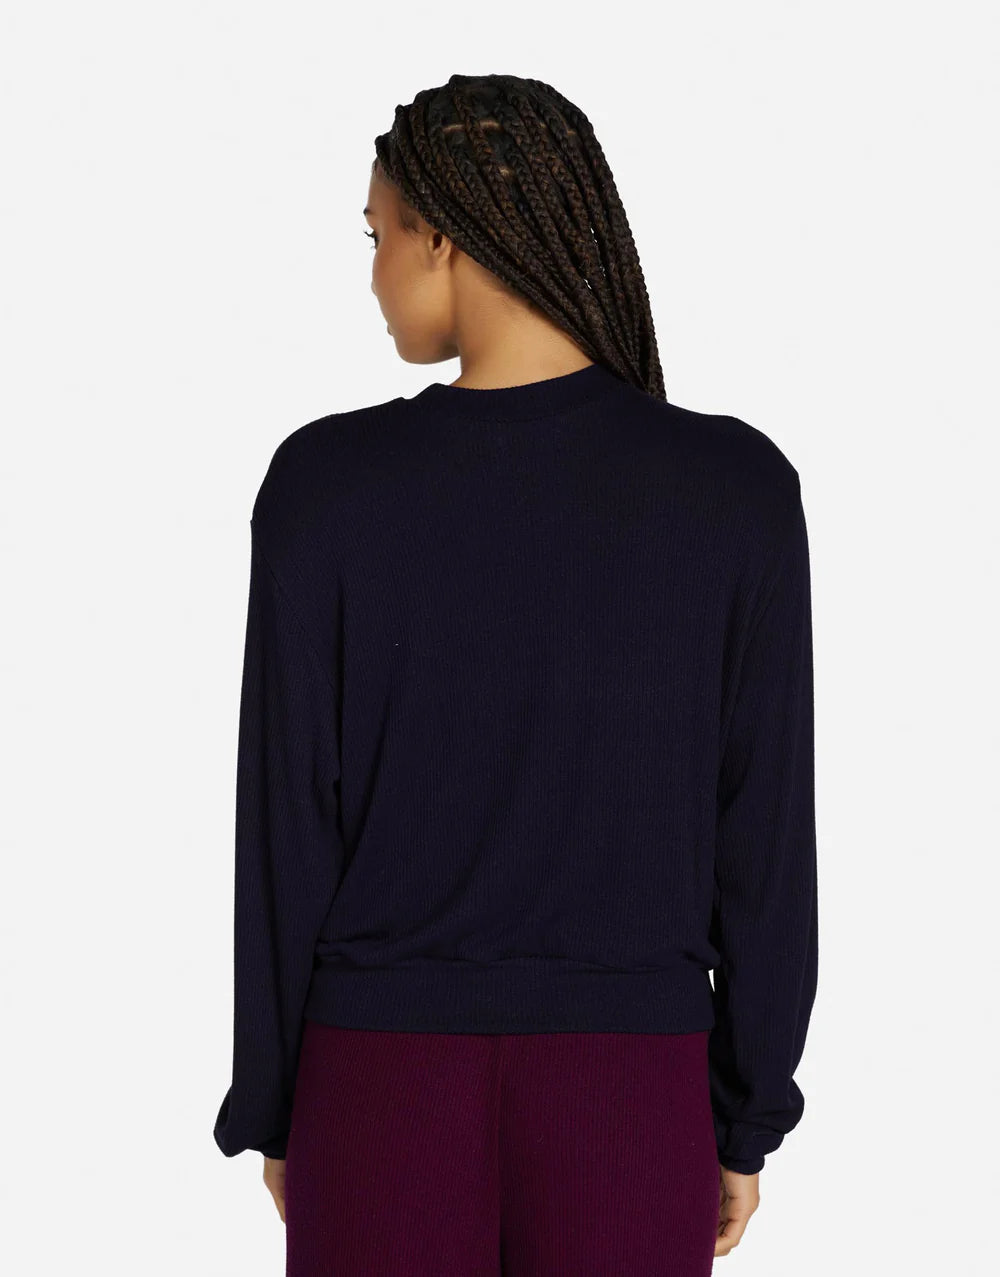 Hamish Crop Pullover by Michael Lauren | ML Signature Soft Sweater Knit Fabric Oversized/ Boyfriend Silhouette | Alene Too located in FL